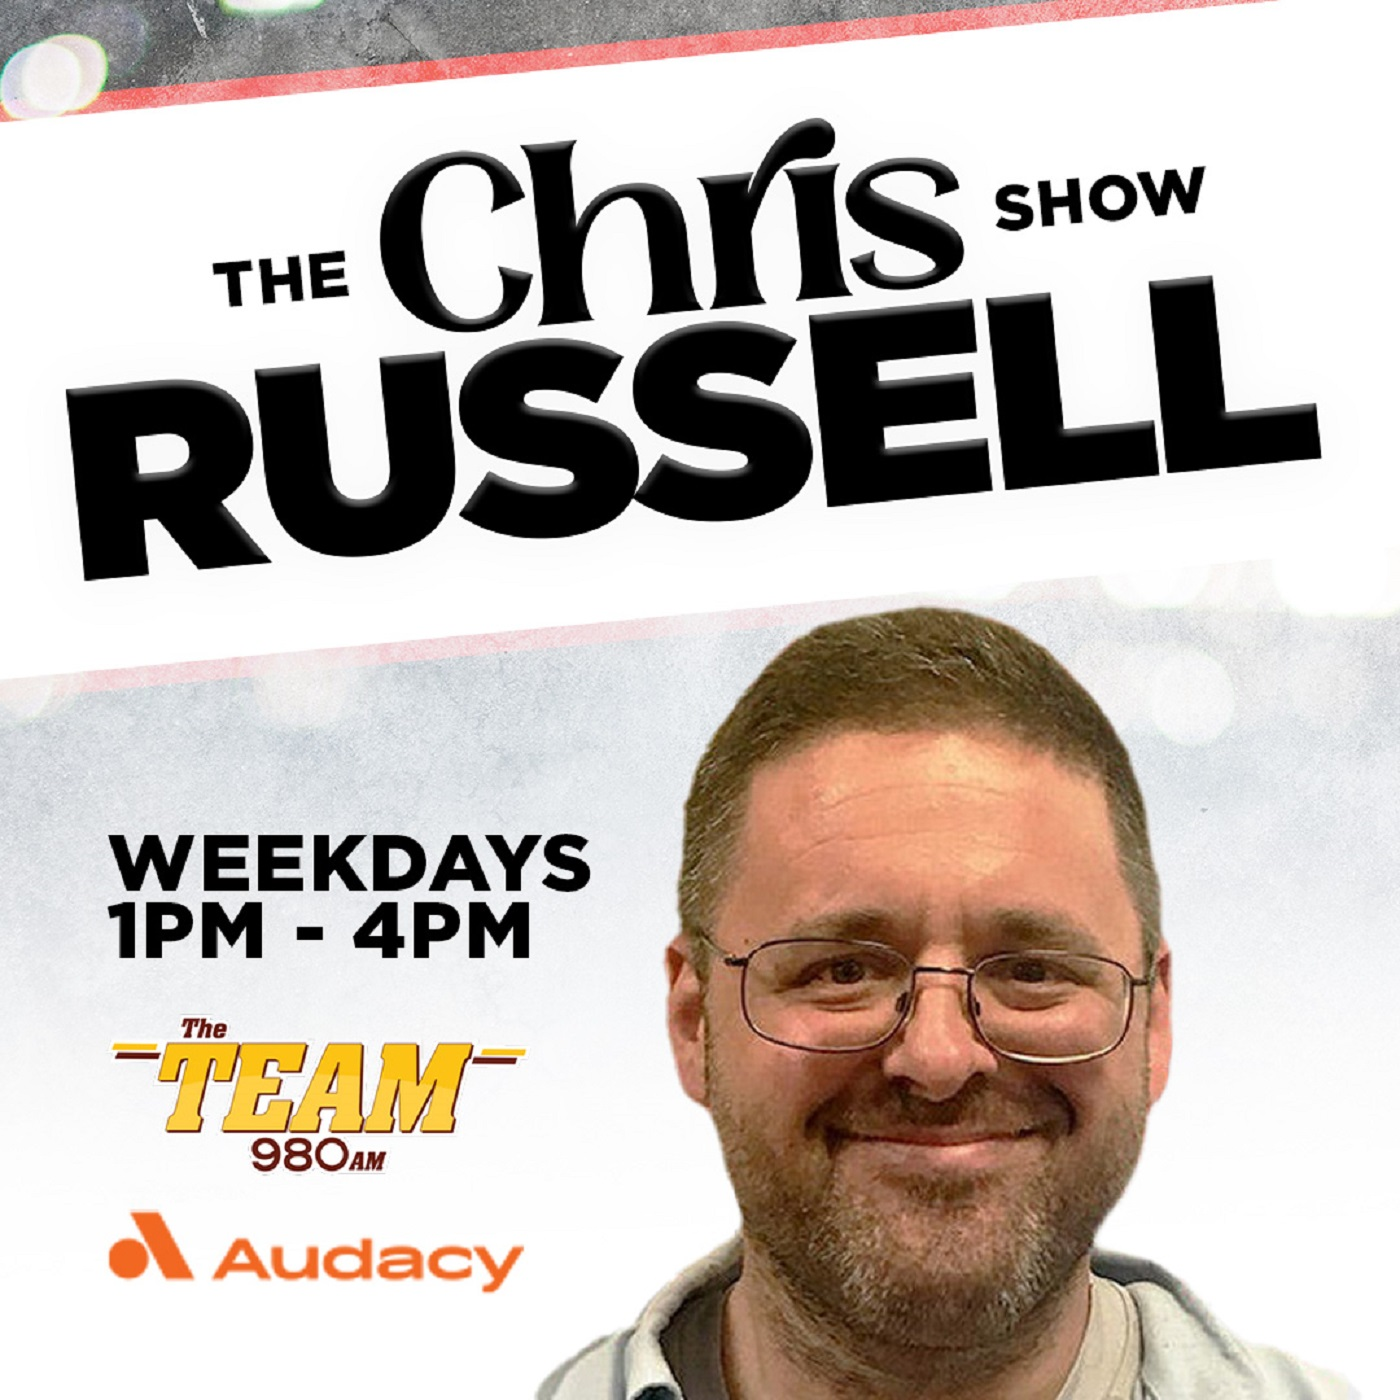 Corey Kisptert joins the show + more of your calls on trading Sweat or Young